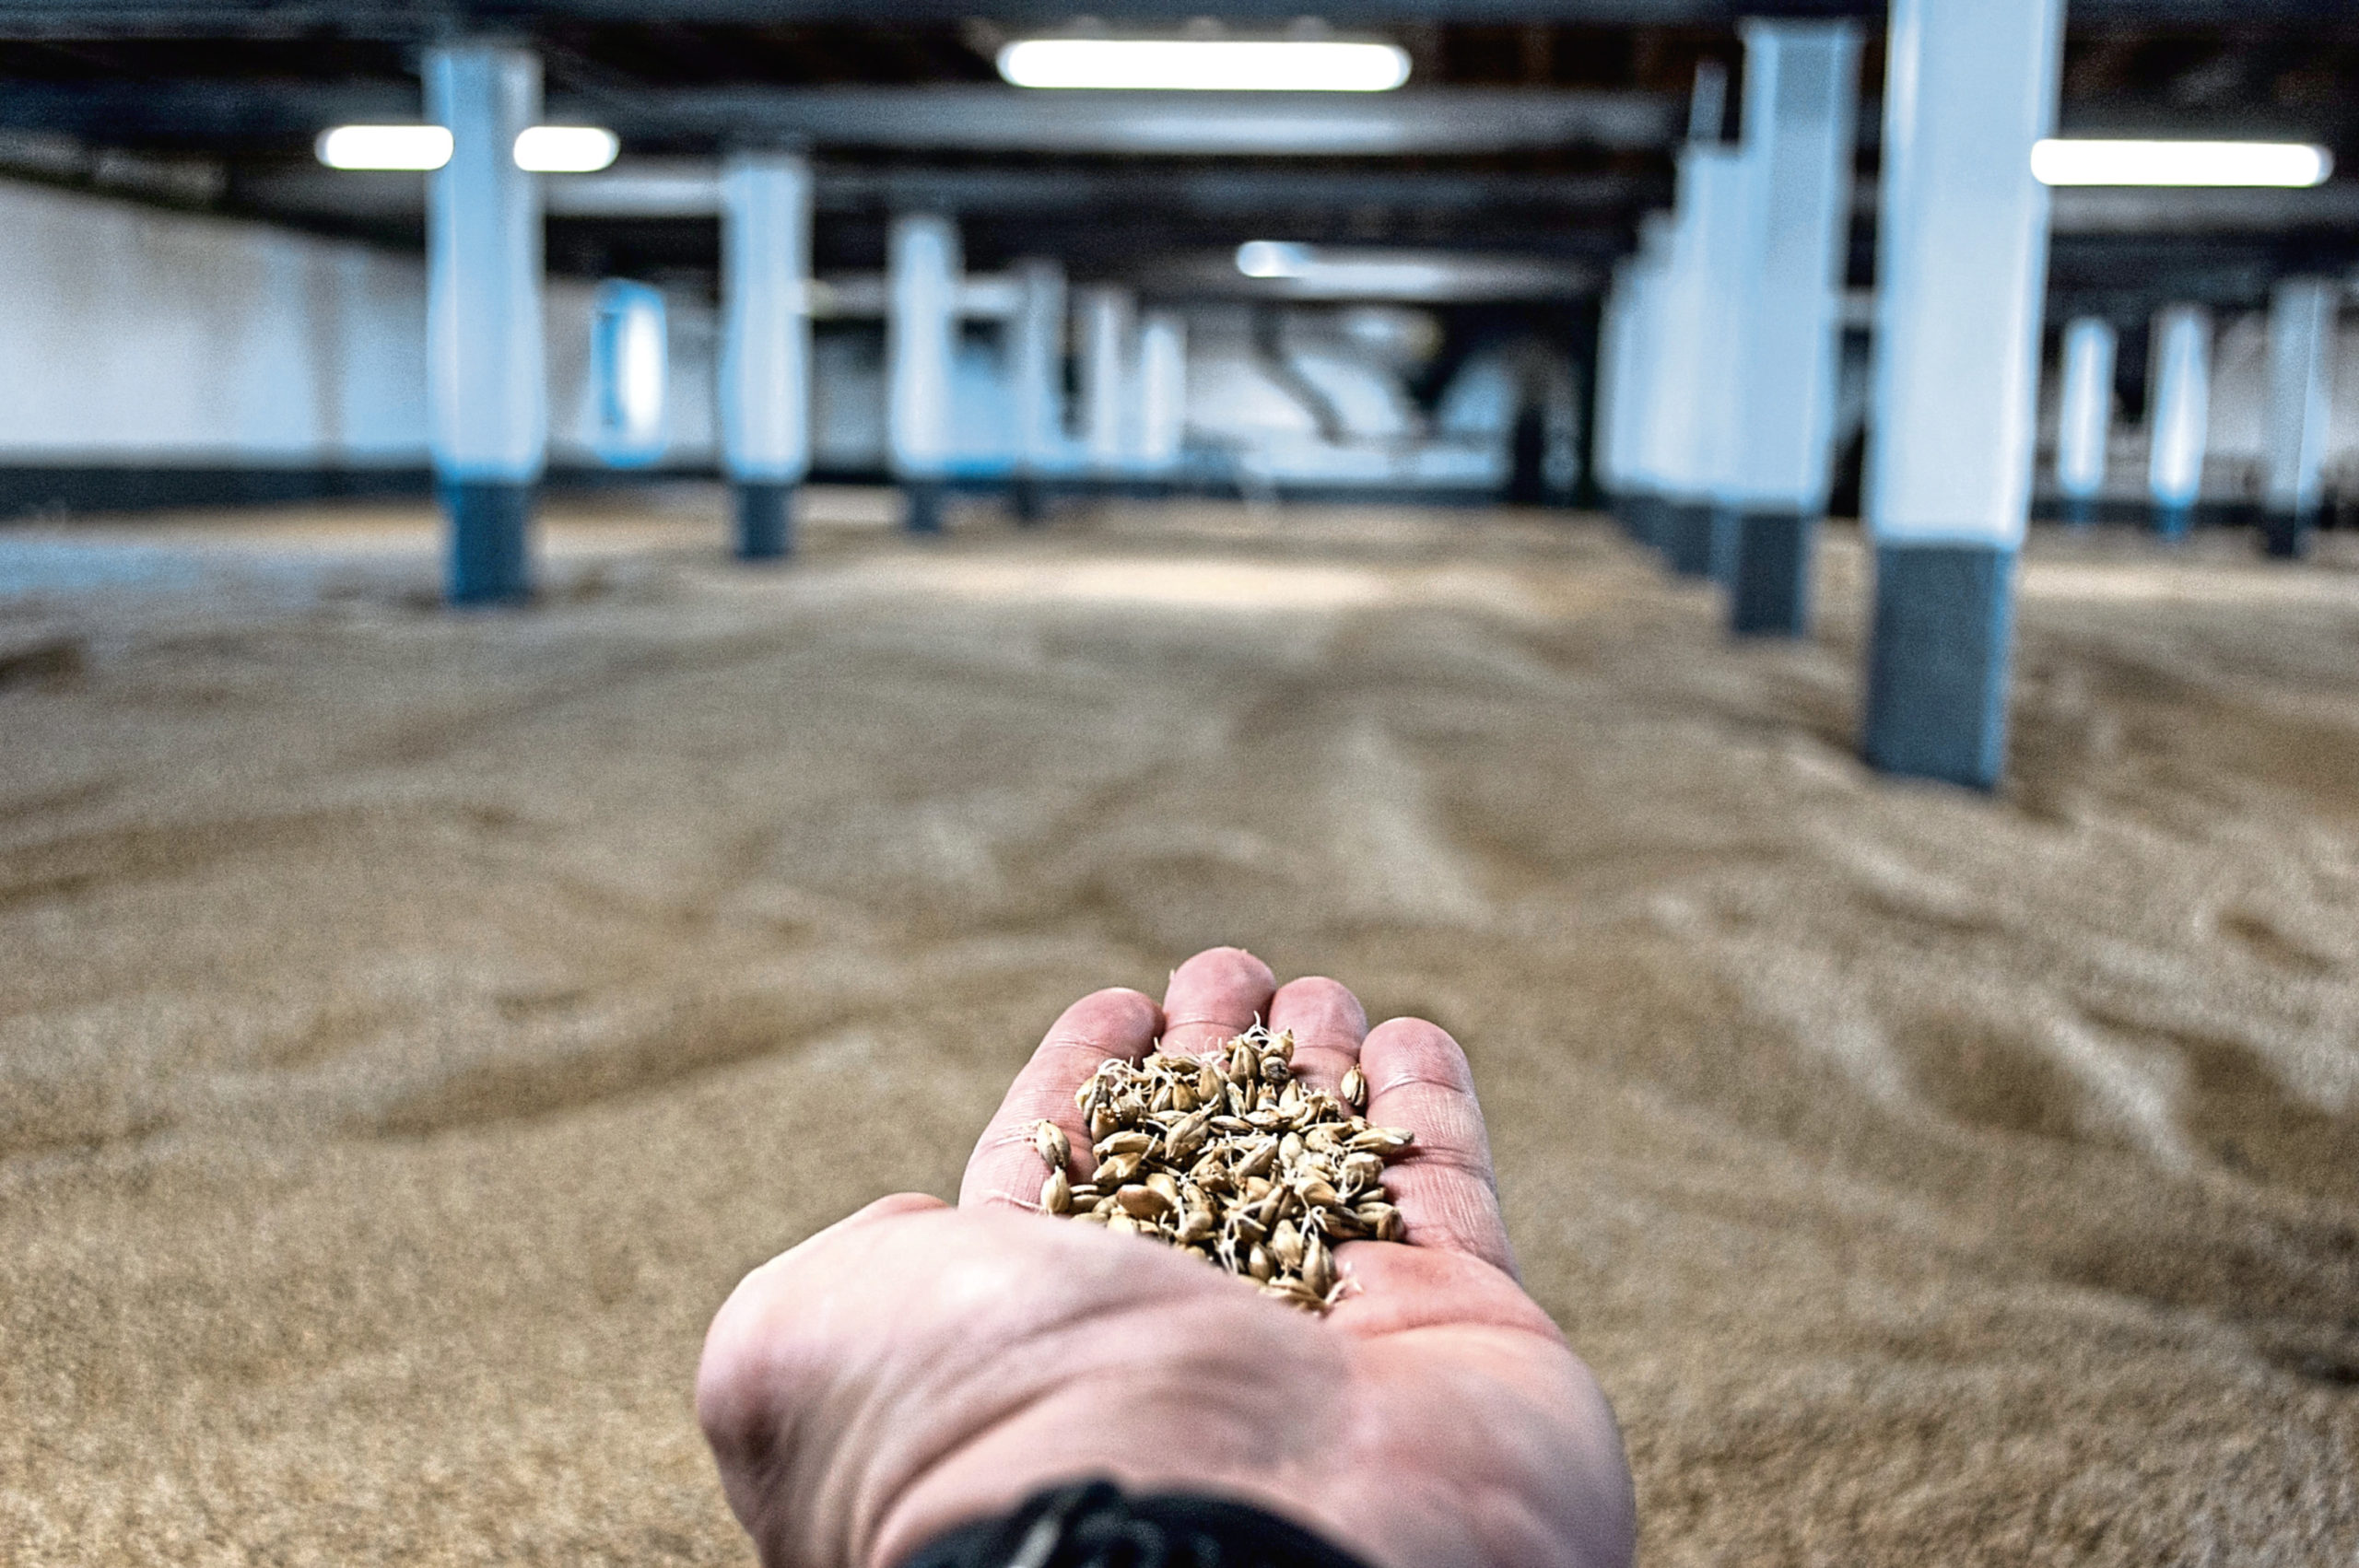 The Scotch Whisky Association says around 90% of barley requirements of the industry are sourced in Scotland.